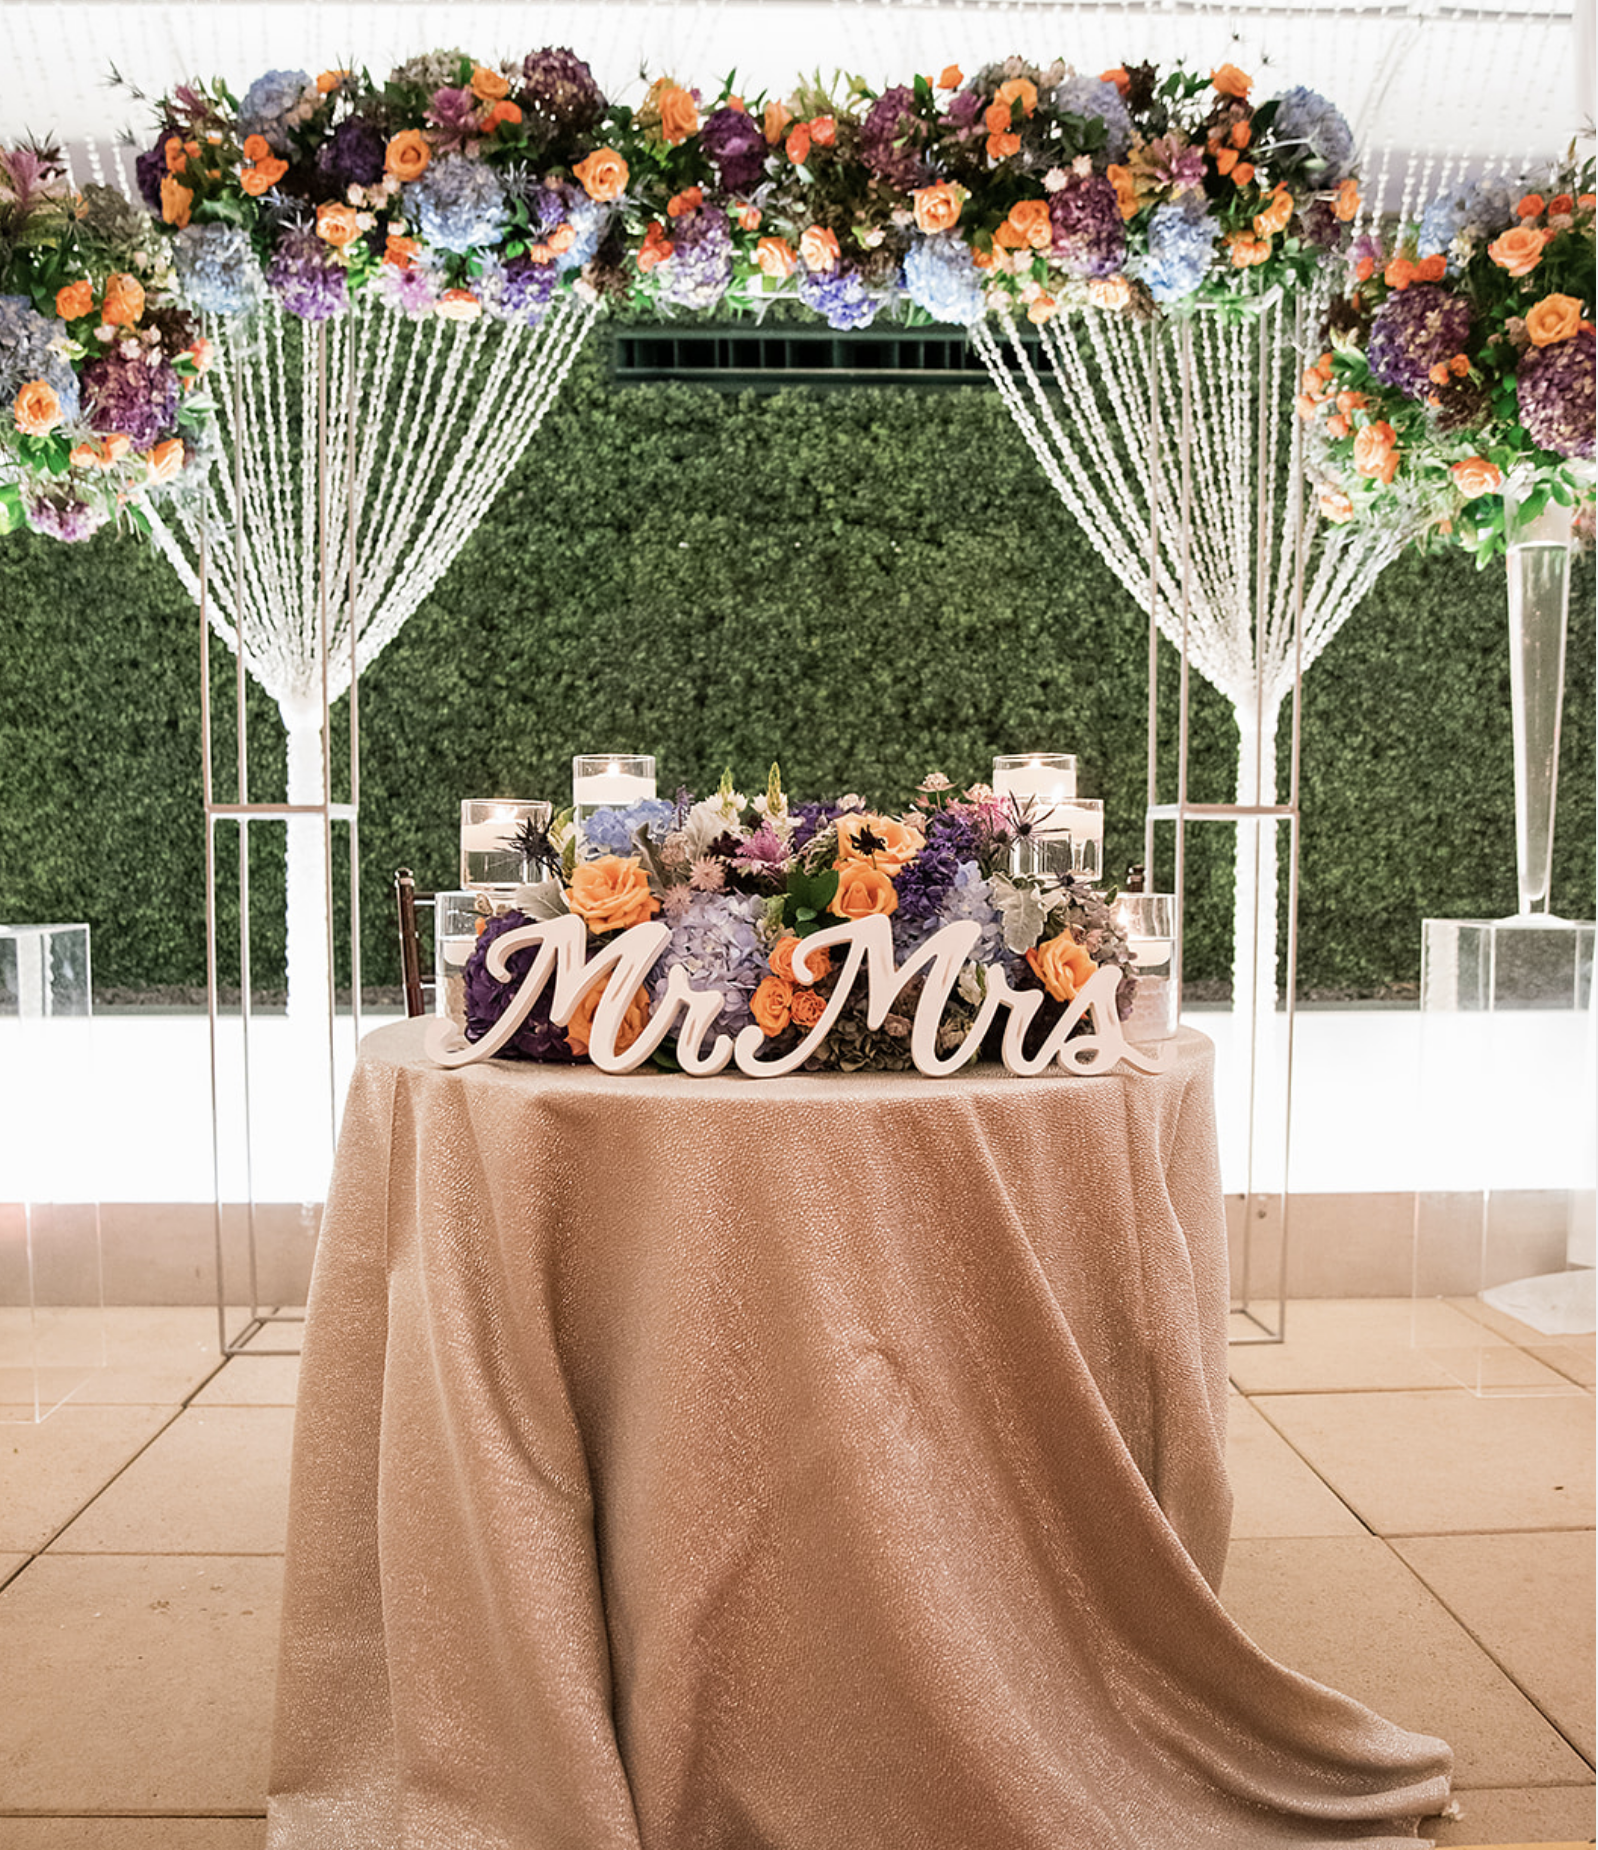 A sweetheart table decorated with floating candles and flowers at the Sam Houston Hotel.